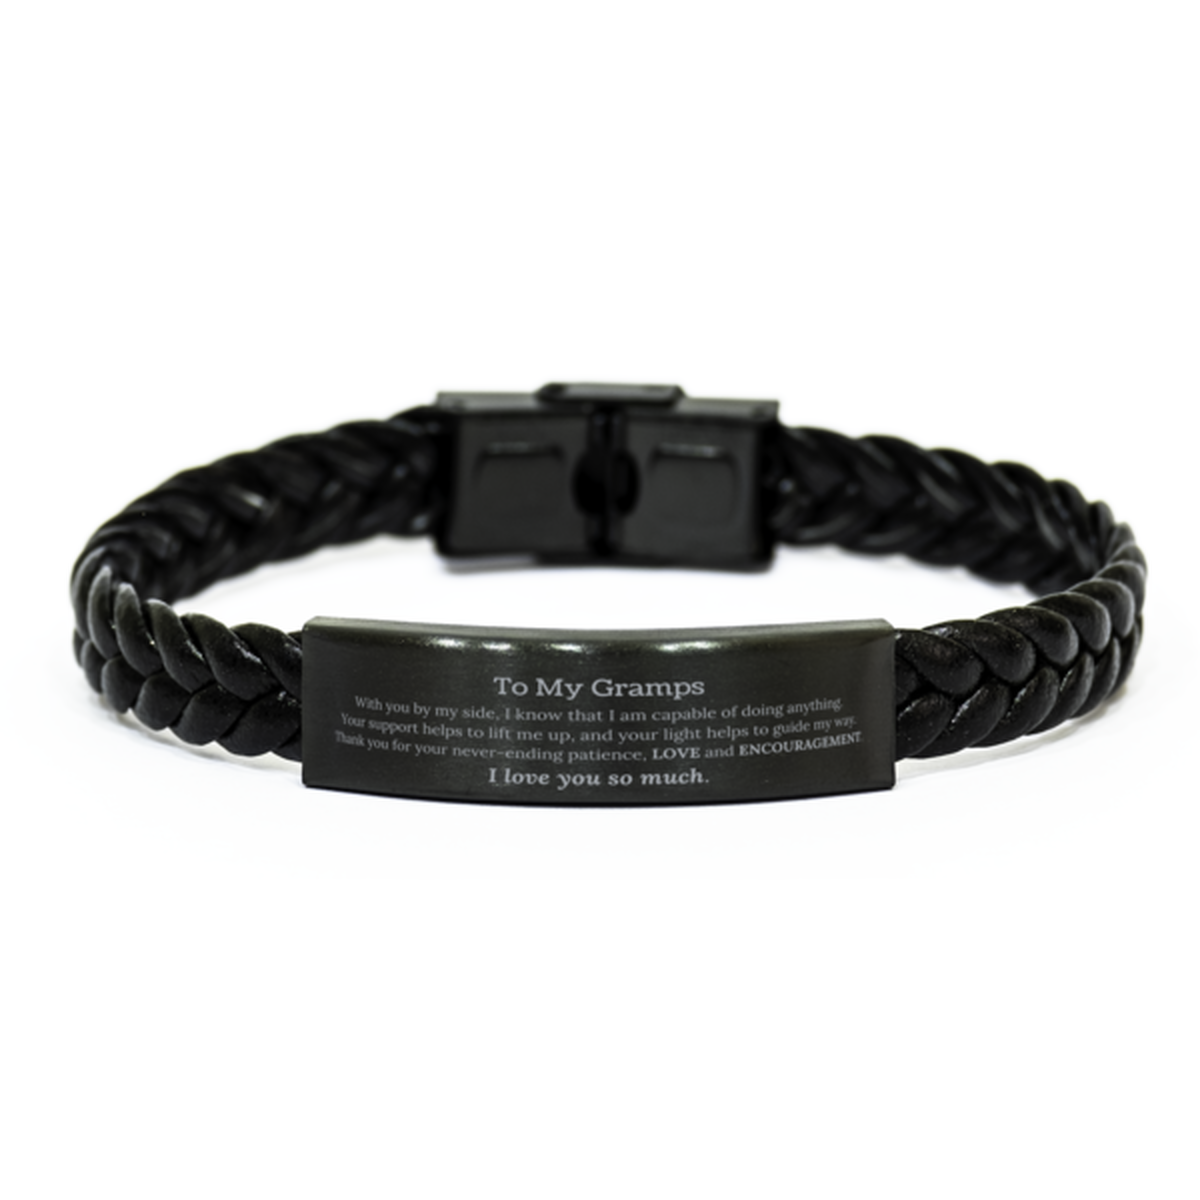 Appreciation Gramps Braided Leather Bracelet Gifts, To My Gramps Birthday Christmas Wedding Keepsake Gifts for Gramps With you by my side, I know that I am capable of doing anything. I love you so much